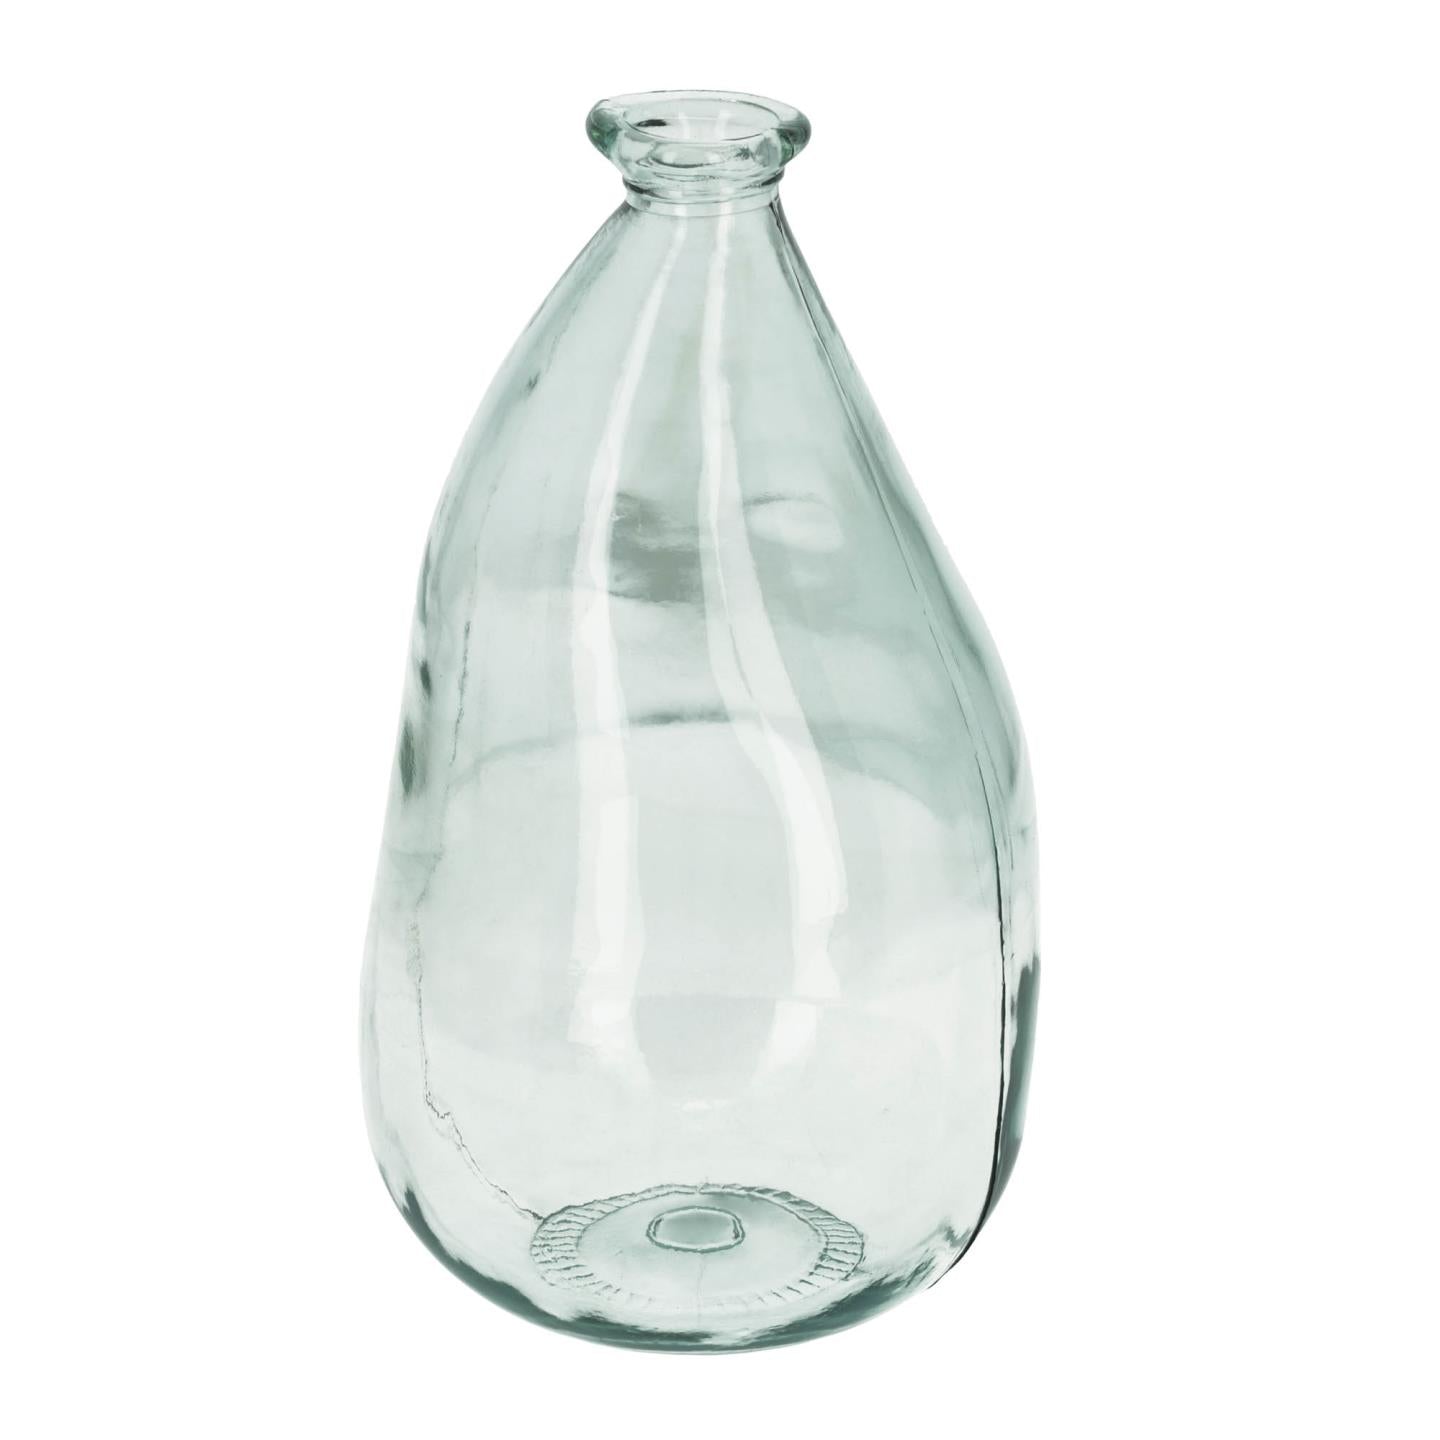 Brenna vase in 100% recycled transparent glass, 36 cm